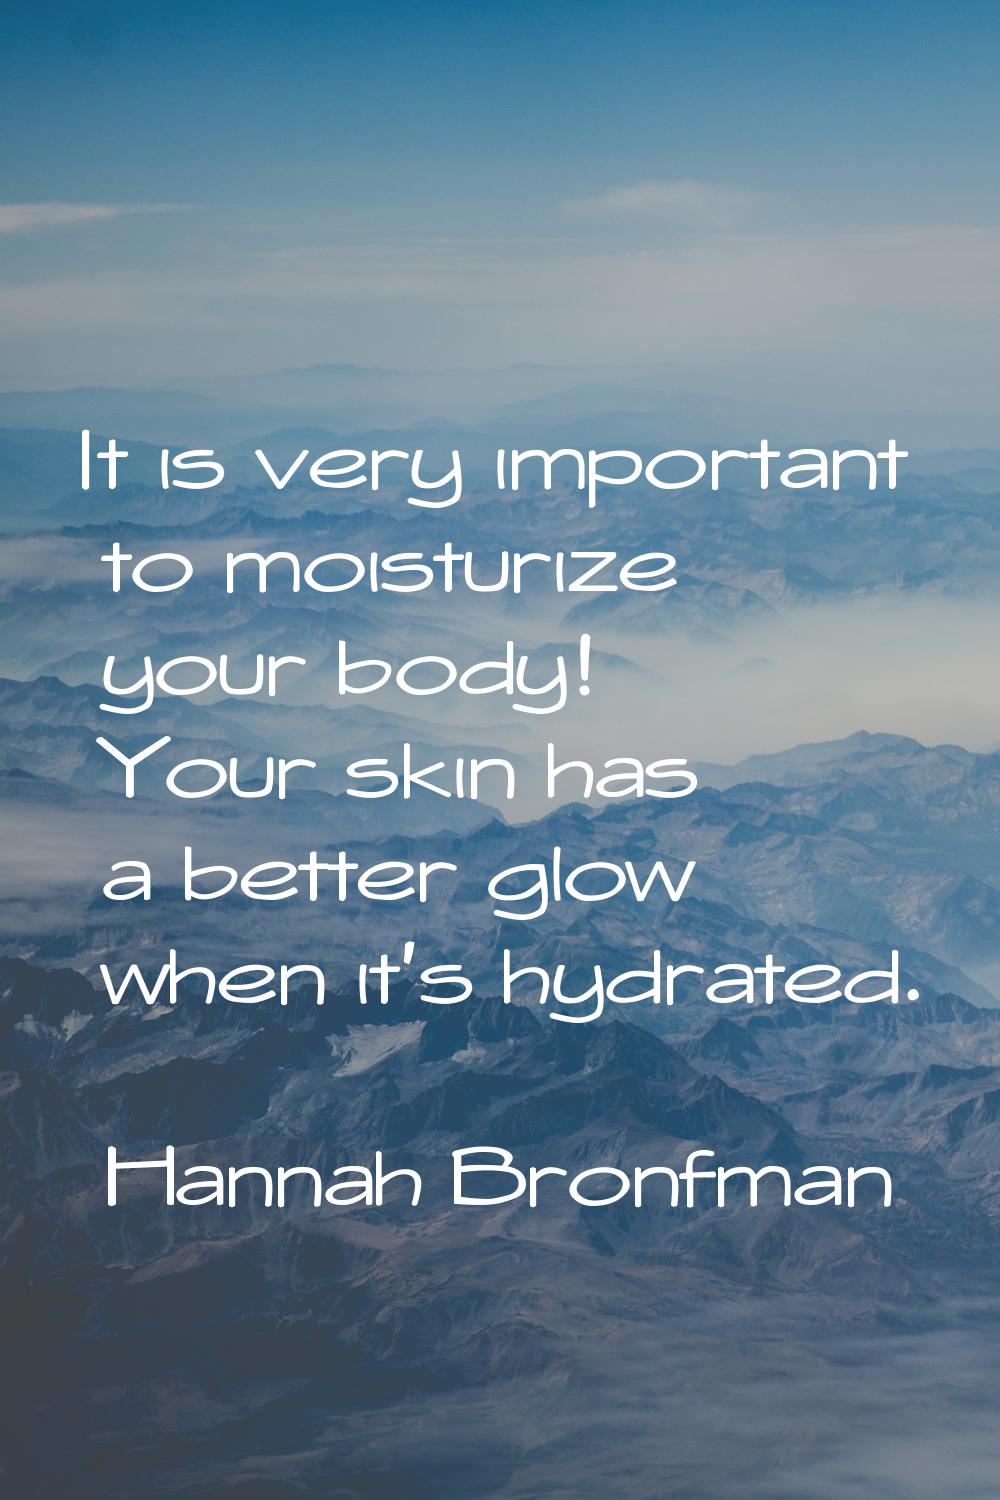 It is very important to moisturize your body! Your skin has a better glow when it's hydrated.